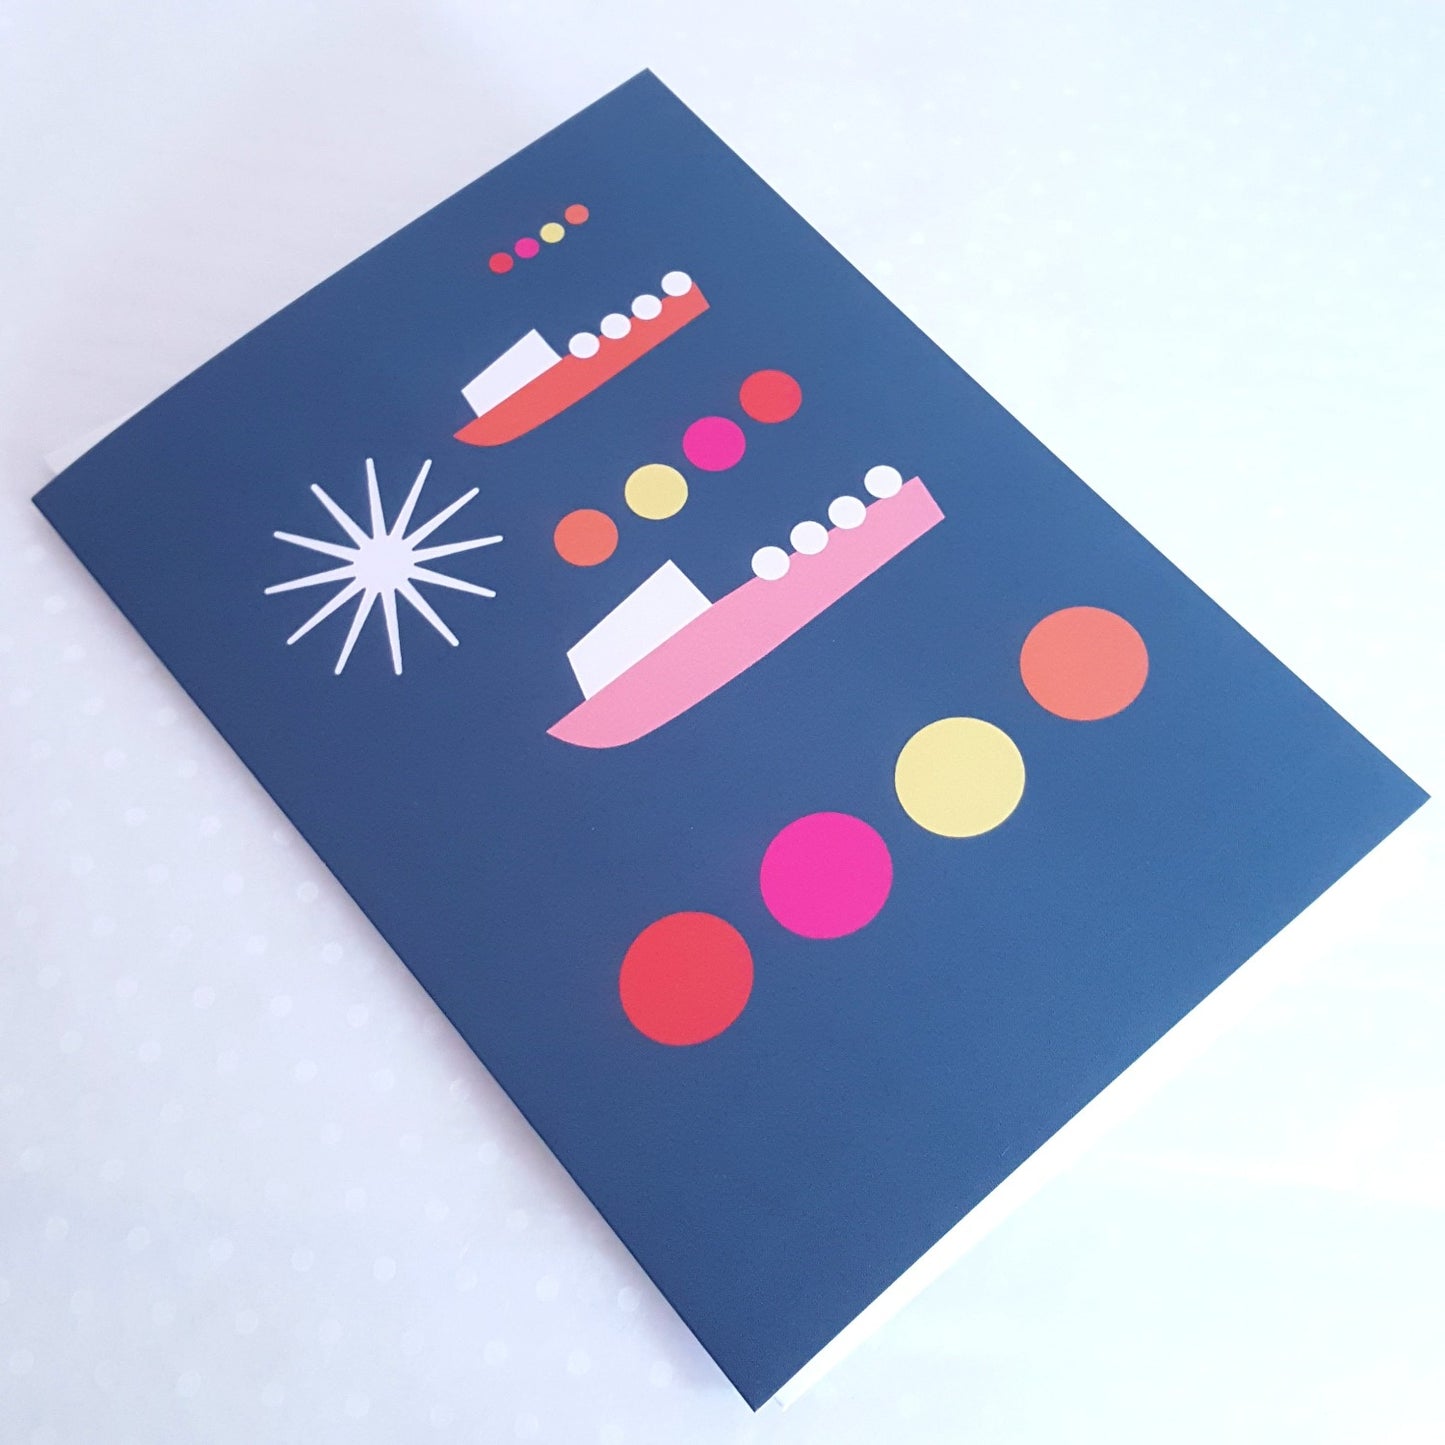 Boats by Moonlight greeting card by Julia Laing Studio.